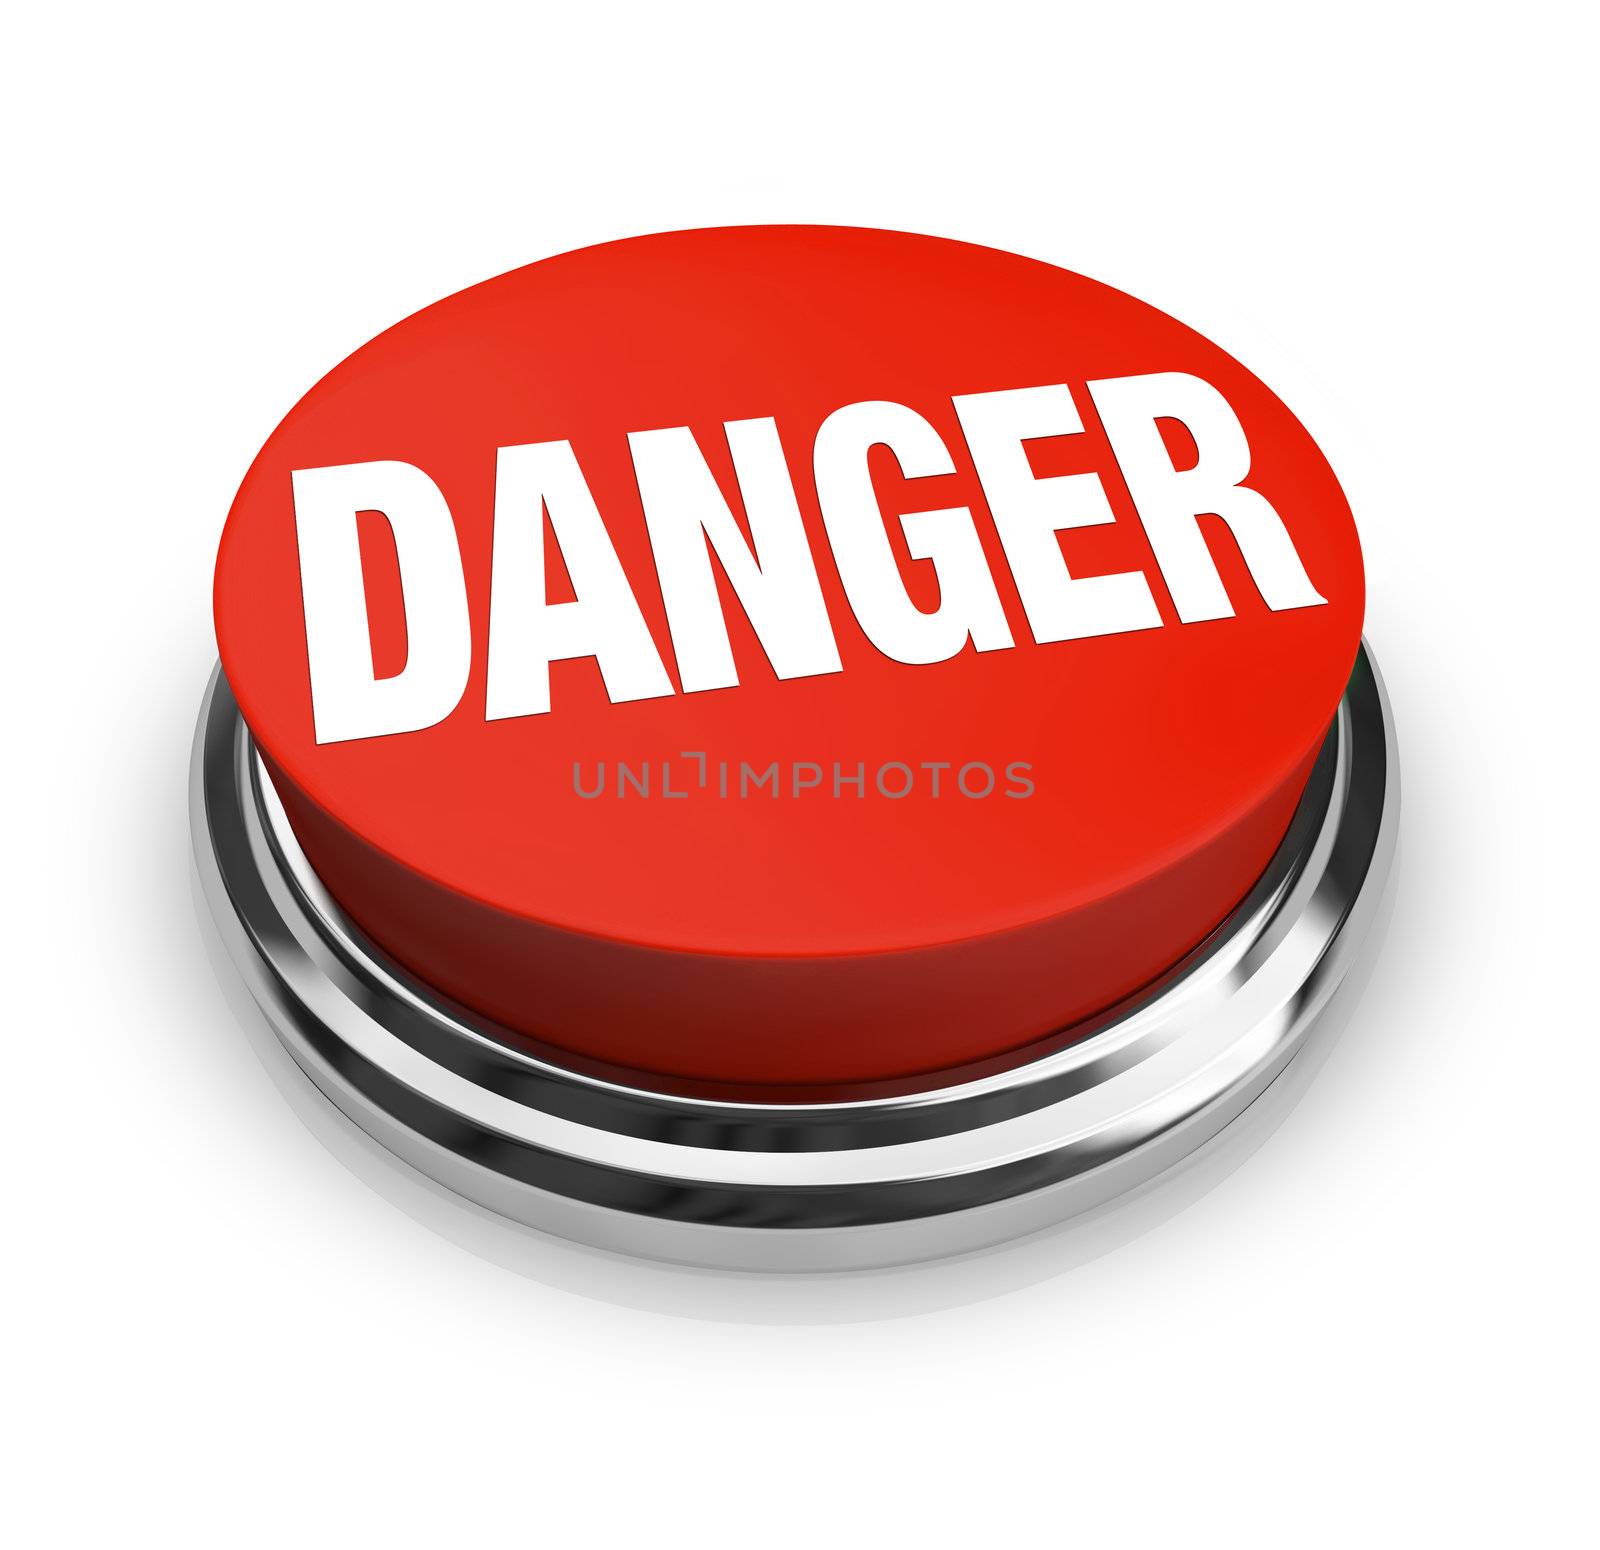 A red button with the word Danger, illustrating the hazards and need for caution in a situation.  Press the round button to alert the authorities or others around you to a dangerous problem!